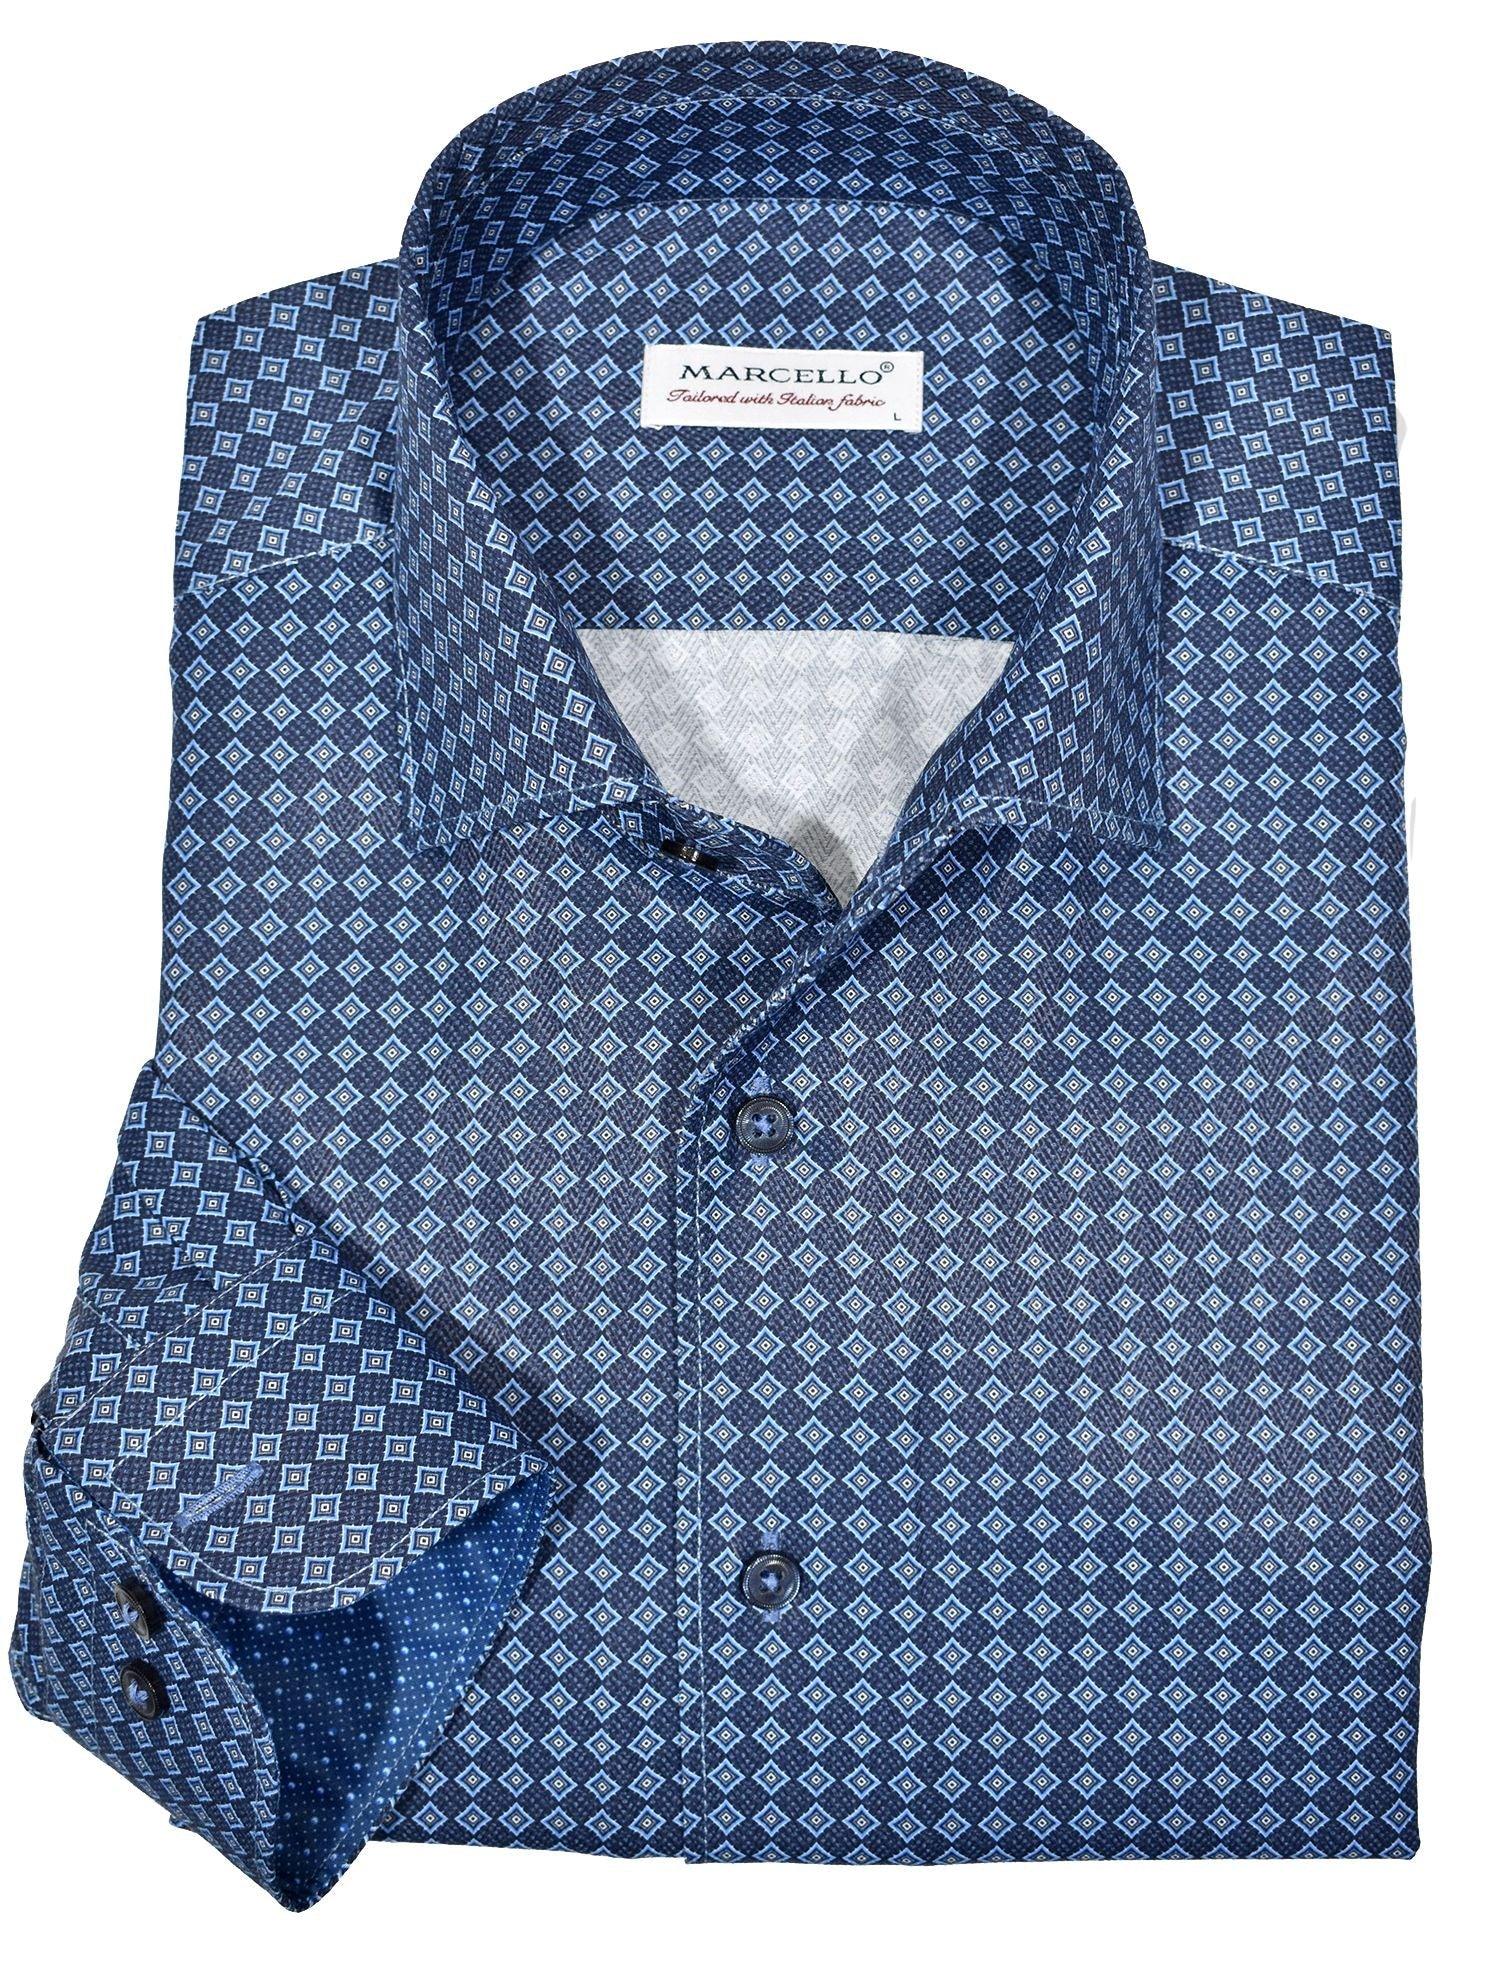 Marcello exclusive 1 piece roll collar shirt is the ultimate in style and sophistication.  The one piece collar stands perfectly and looks great alone or under a sport coat.  You will surely want every one piece roll collar shirt we offer.  Rich cotton / microfiber fabric. Fashion diamond medallion pattern in rich blue colors. Adjustable 2 button cuffs. Unique extra sleeve button to roll cuffs without flaring. Slim fit. Shirt by Marcello Sport